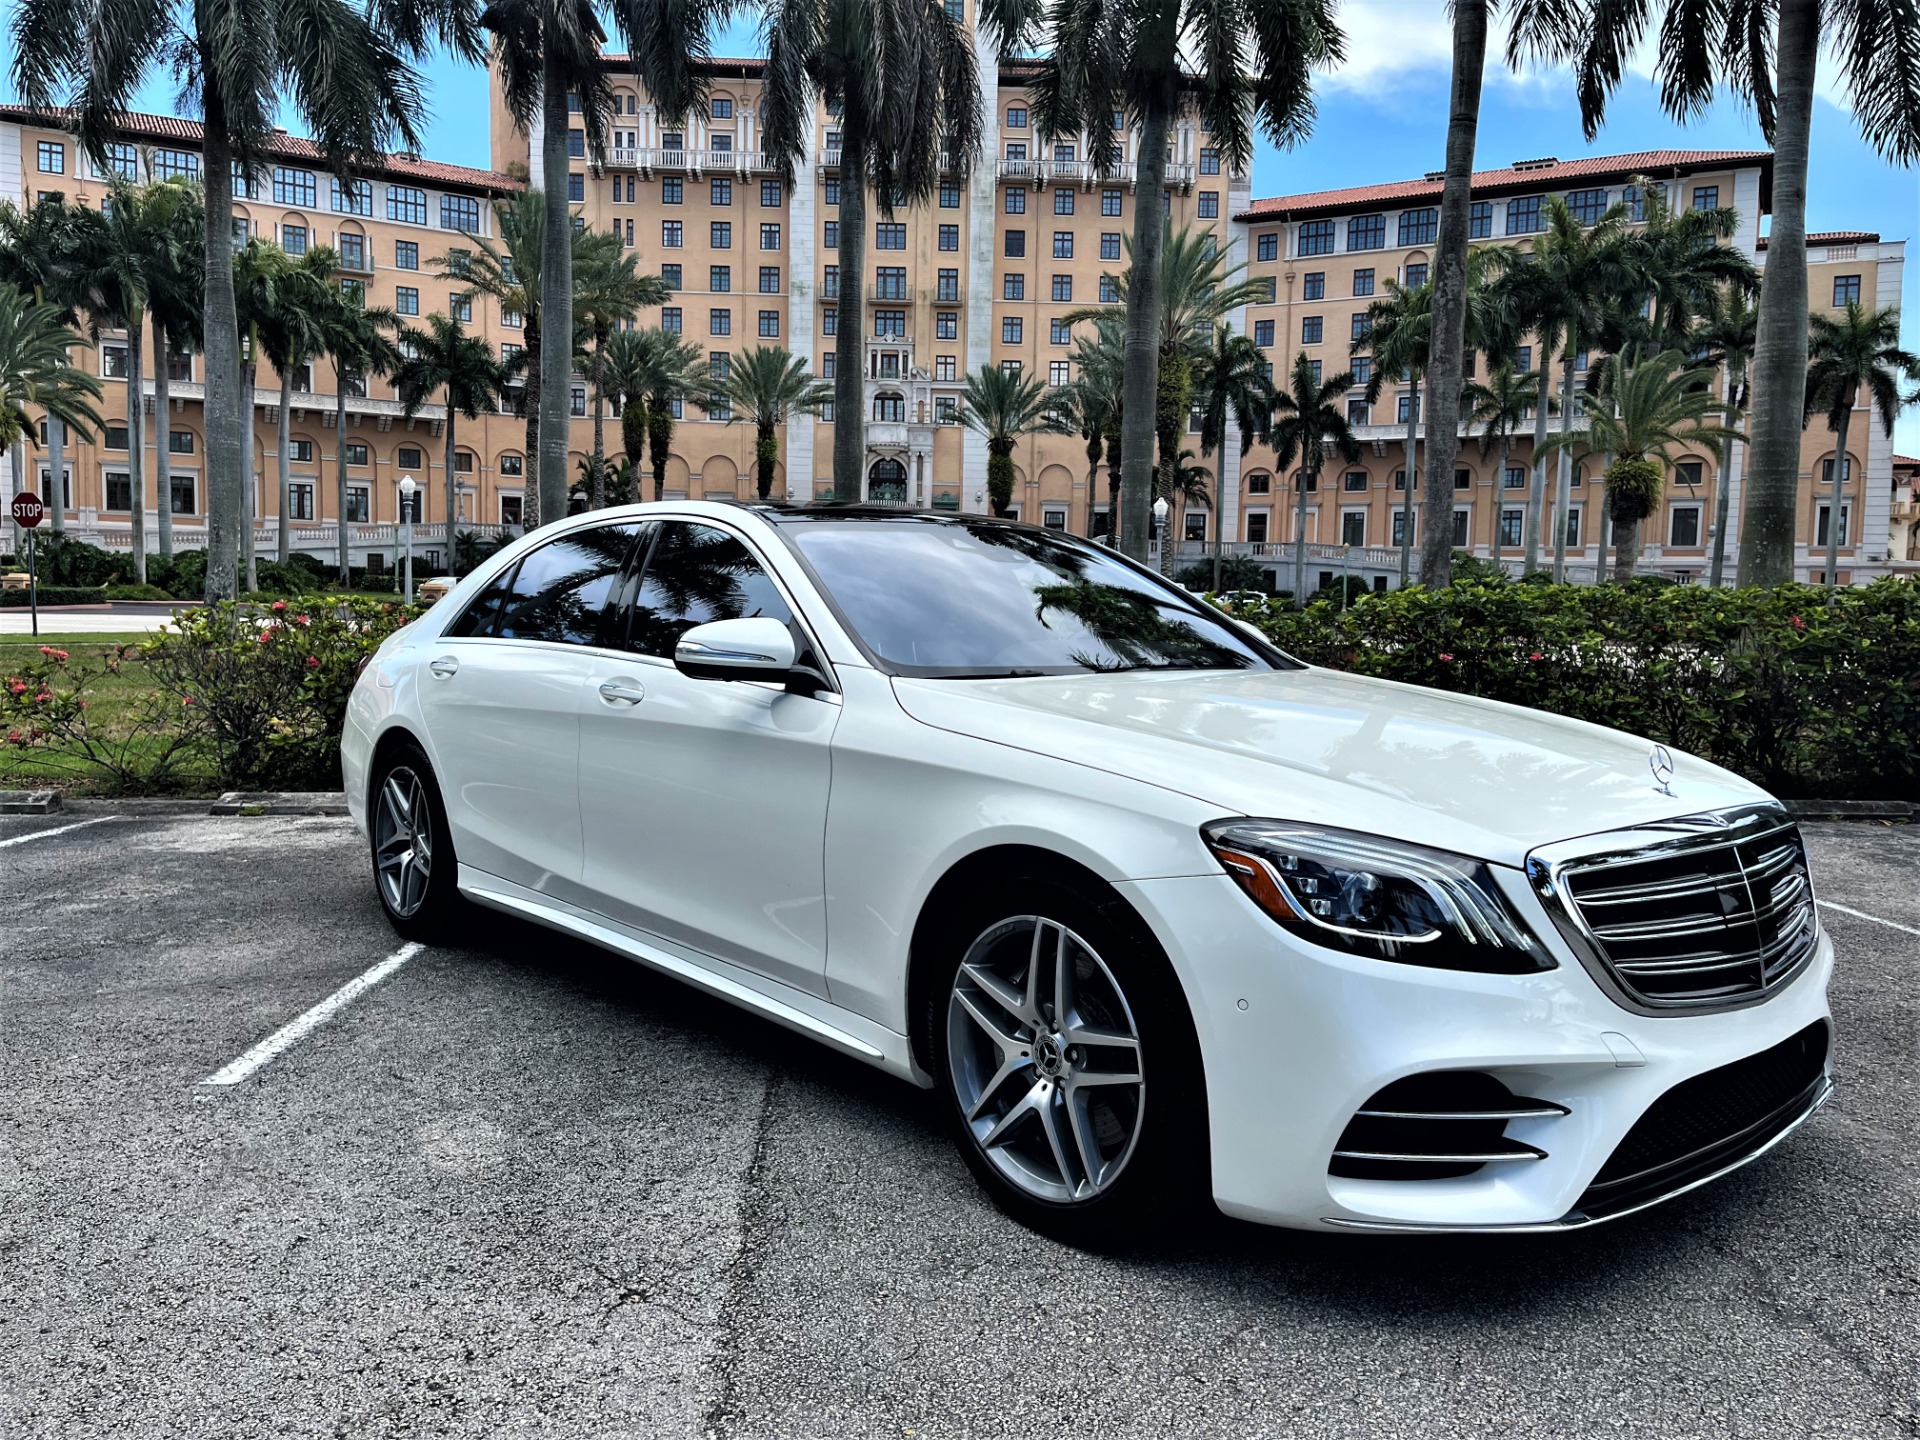 Used 2019 Mercedes-Benz S-Class S 560 4MATIC for sale $76,499 at The Gables Sports Cars in Miami FL 33146 1